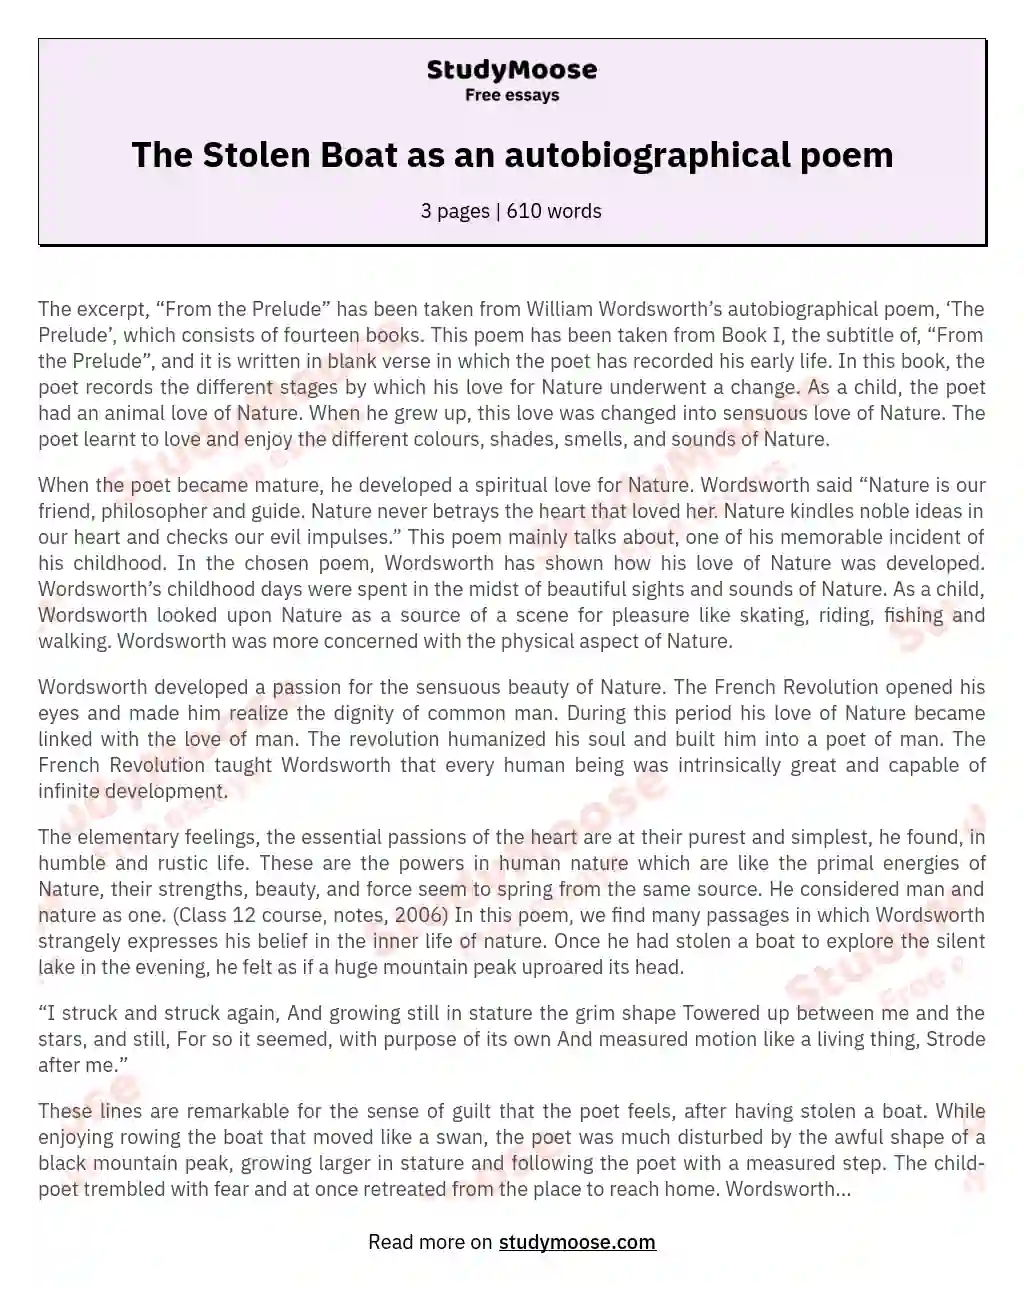 The Stolen Boat as an autobiographical poem essay